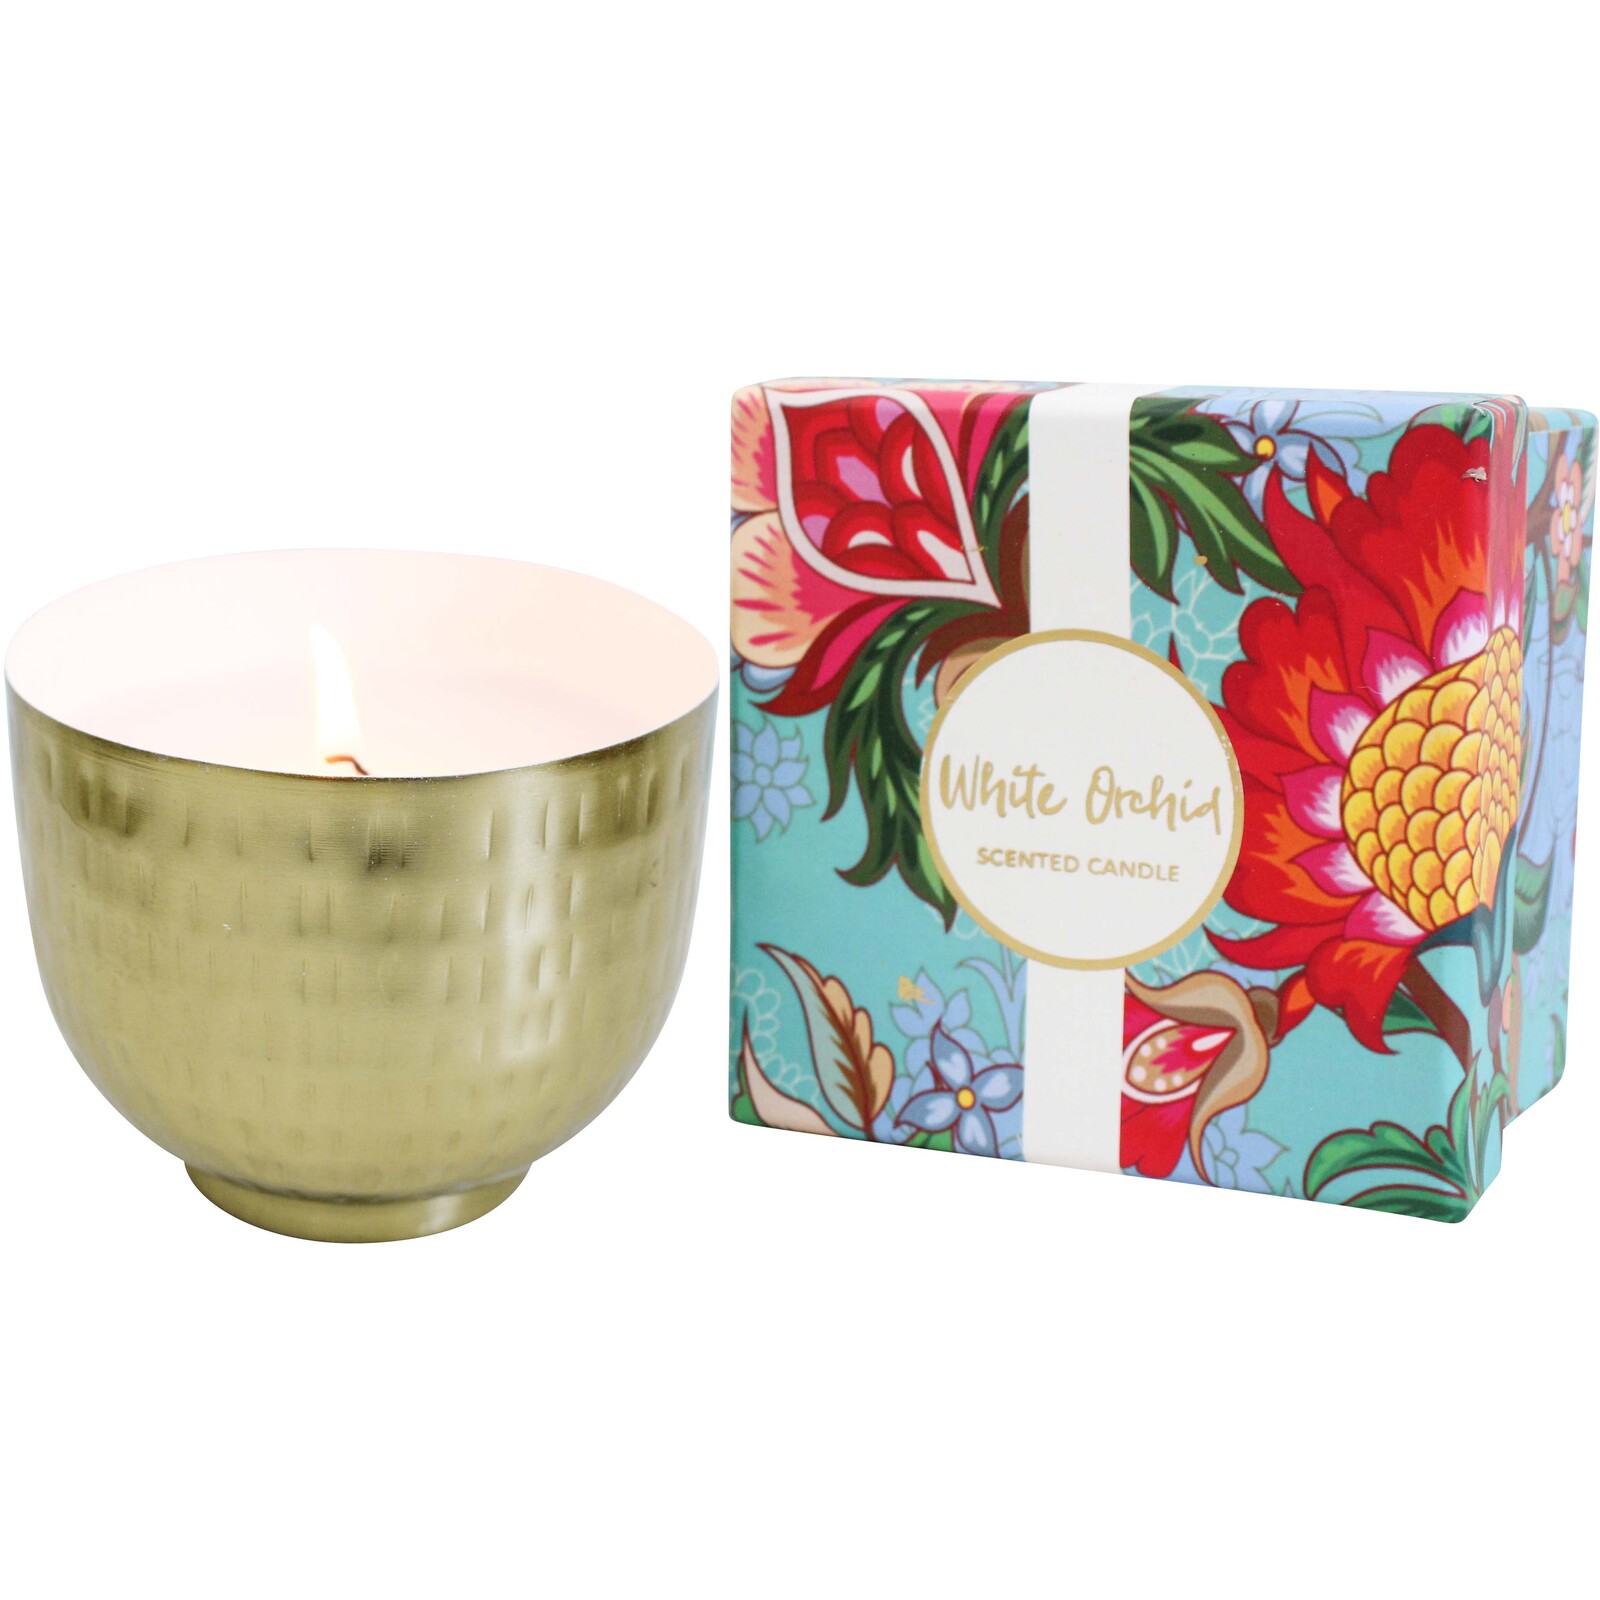 Candle White Orchid